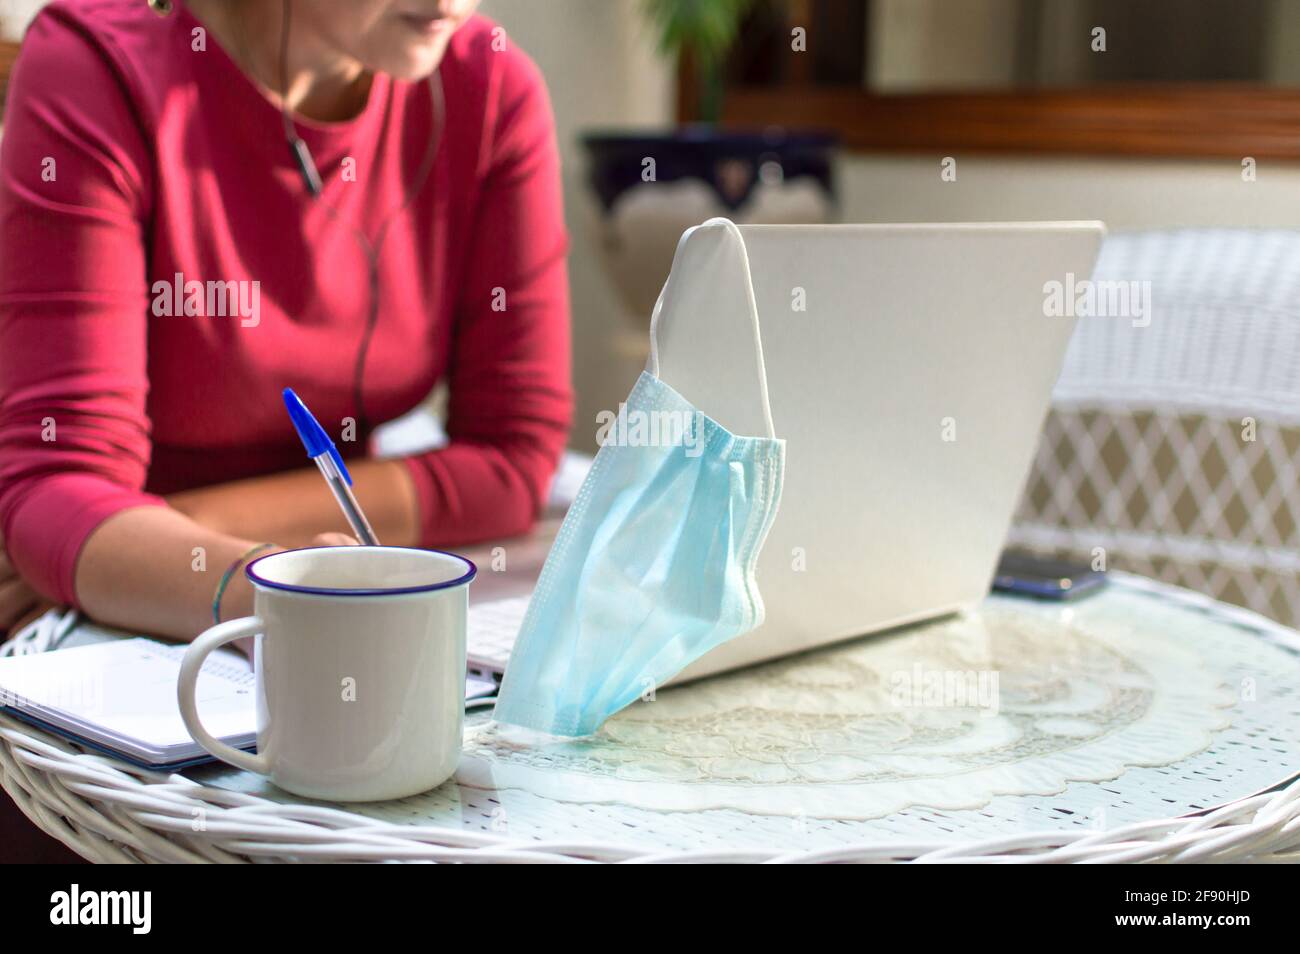 Unrecognized woman removes face mask to work from home. Working from home concept. Stock Photo